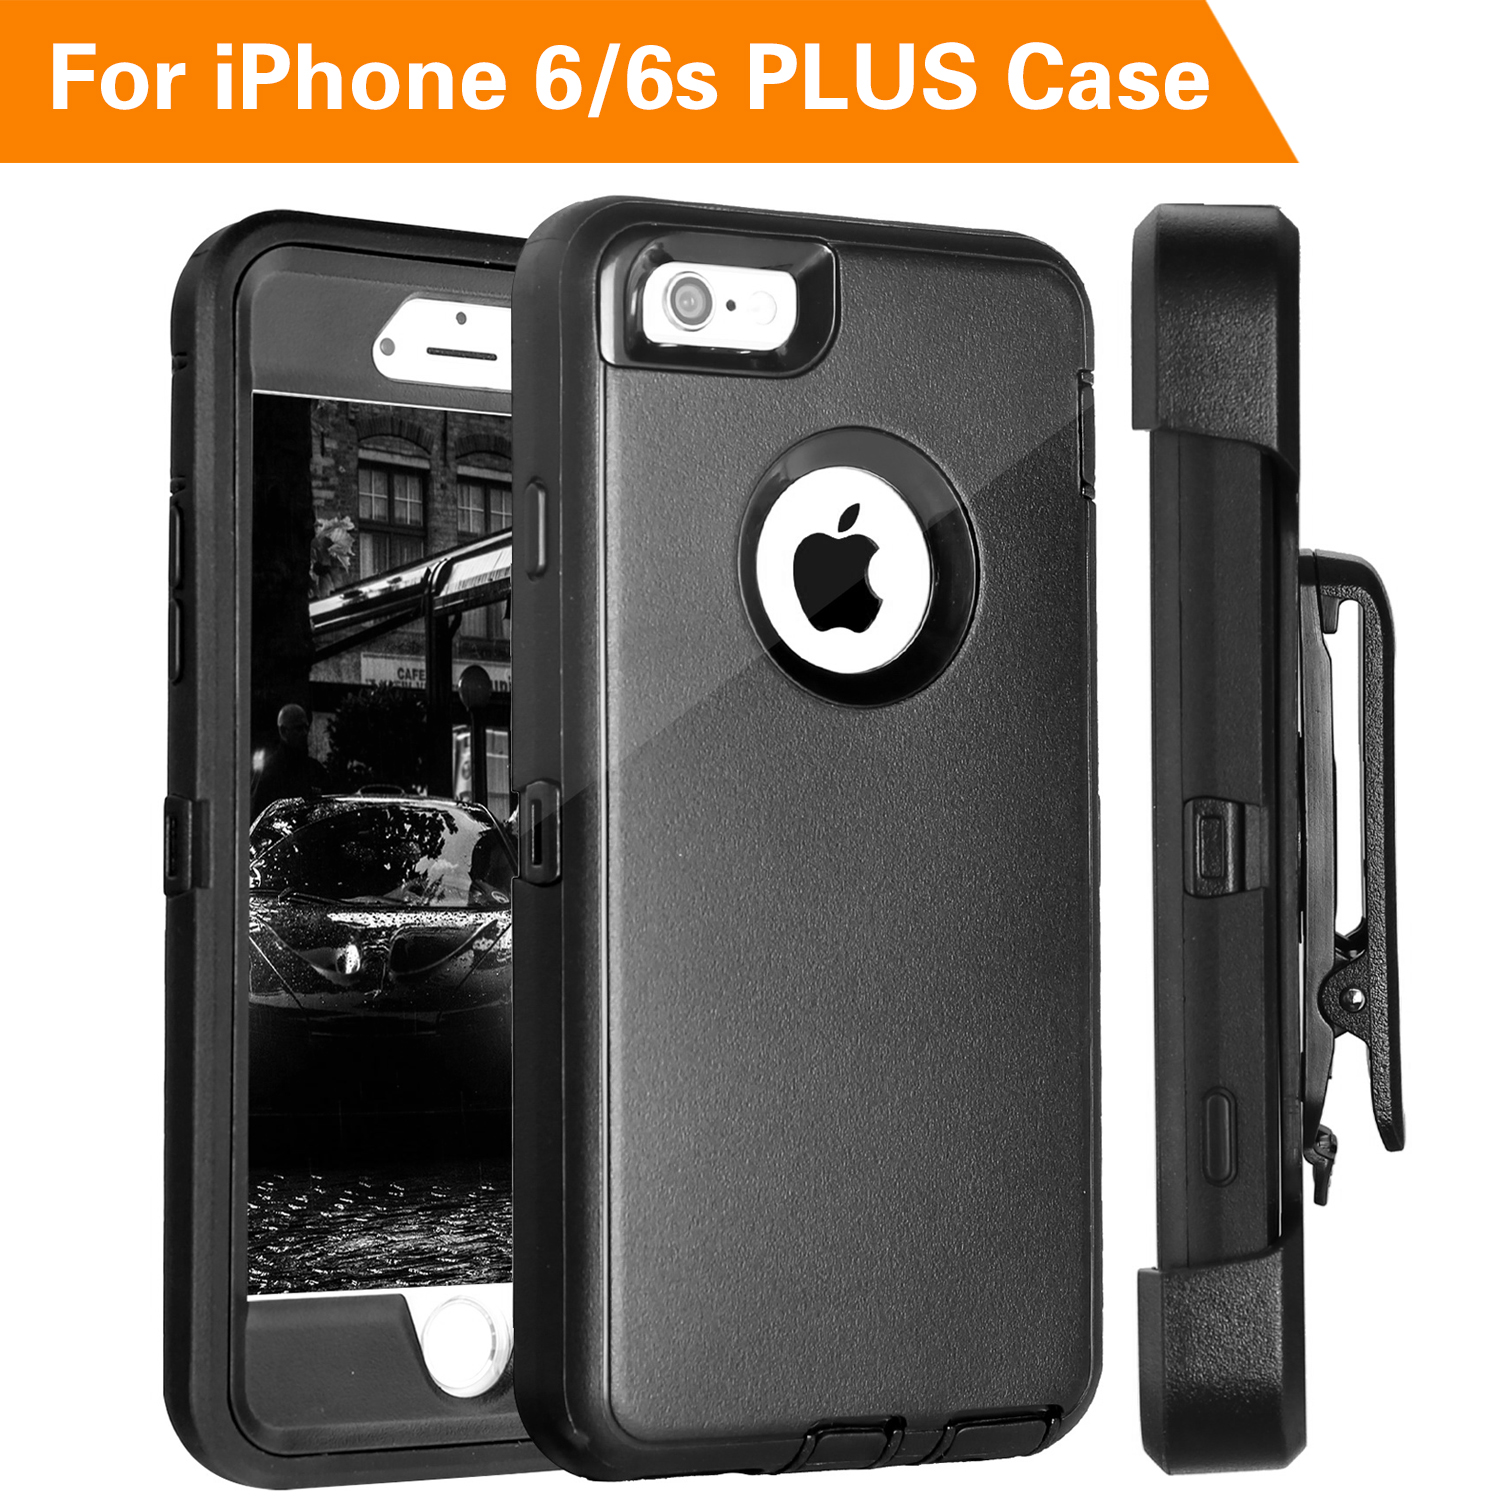 iPhone 6S Plus Case,FOGEEK Protective Case Heavy Duty Cover Compatible for iPhone 6 Plus & iPhone 6S Plus 5.5 inch 360 Degree Rotary Belt Clip & Kickstand (Black) 